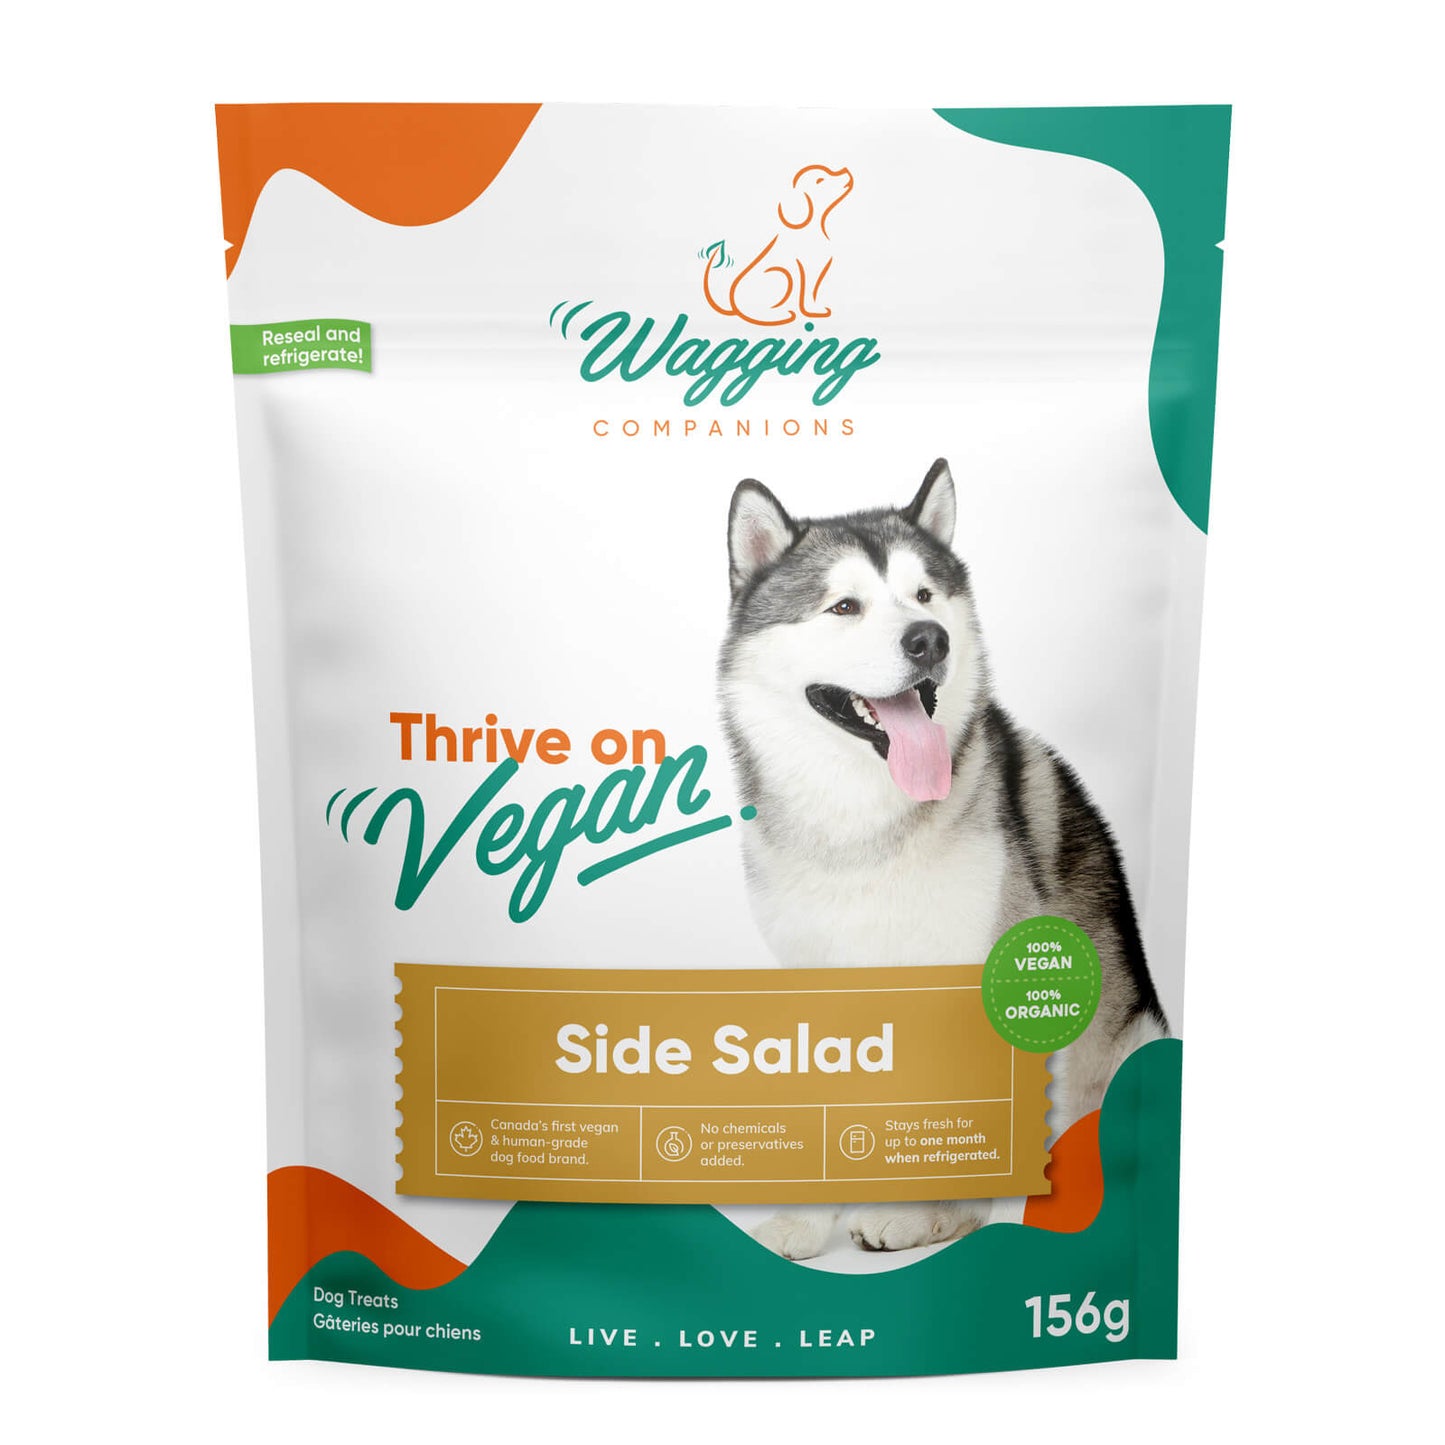 Front view of Wagging Companions' side salad dog treat packaging. The package showcases the 'Side Salad' option, aligning with the brand's 'Thrive on Vegan' message, providing pet owners with a diverse, plant-based treat selection.